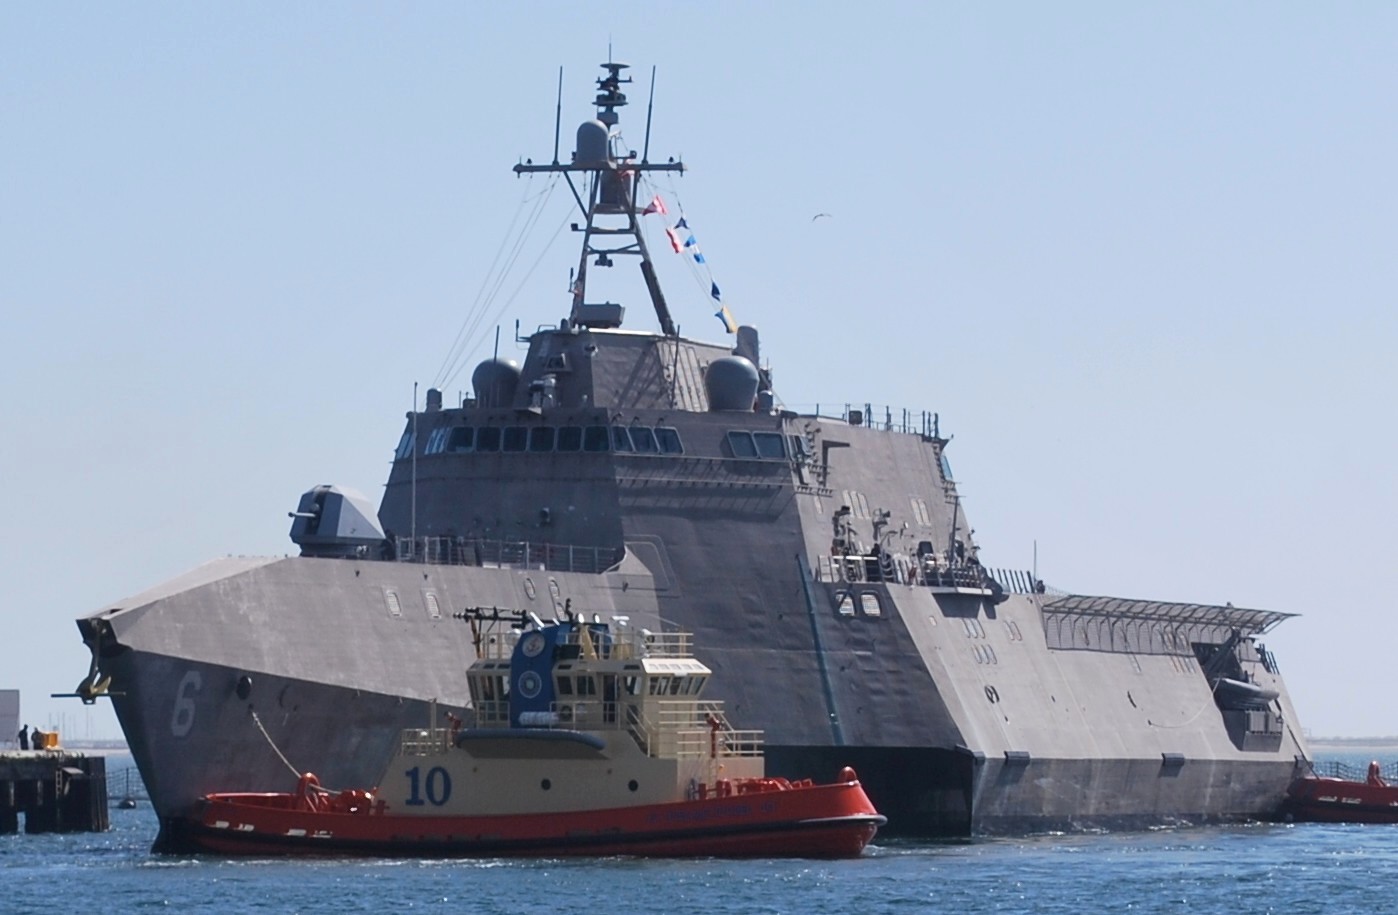 lcs-6 uss jackson independence class littoral combat ship us navy 08 san diego naval base